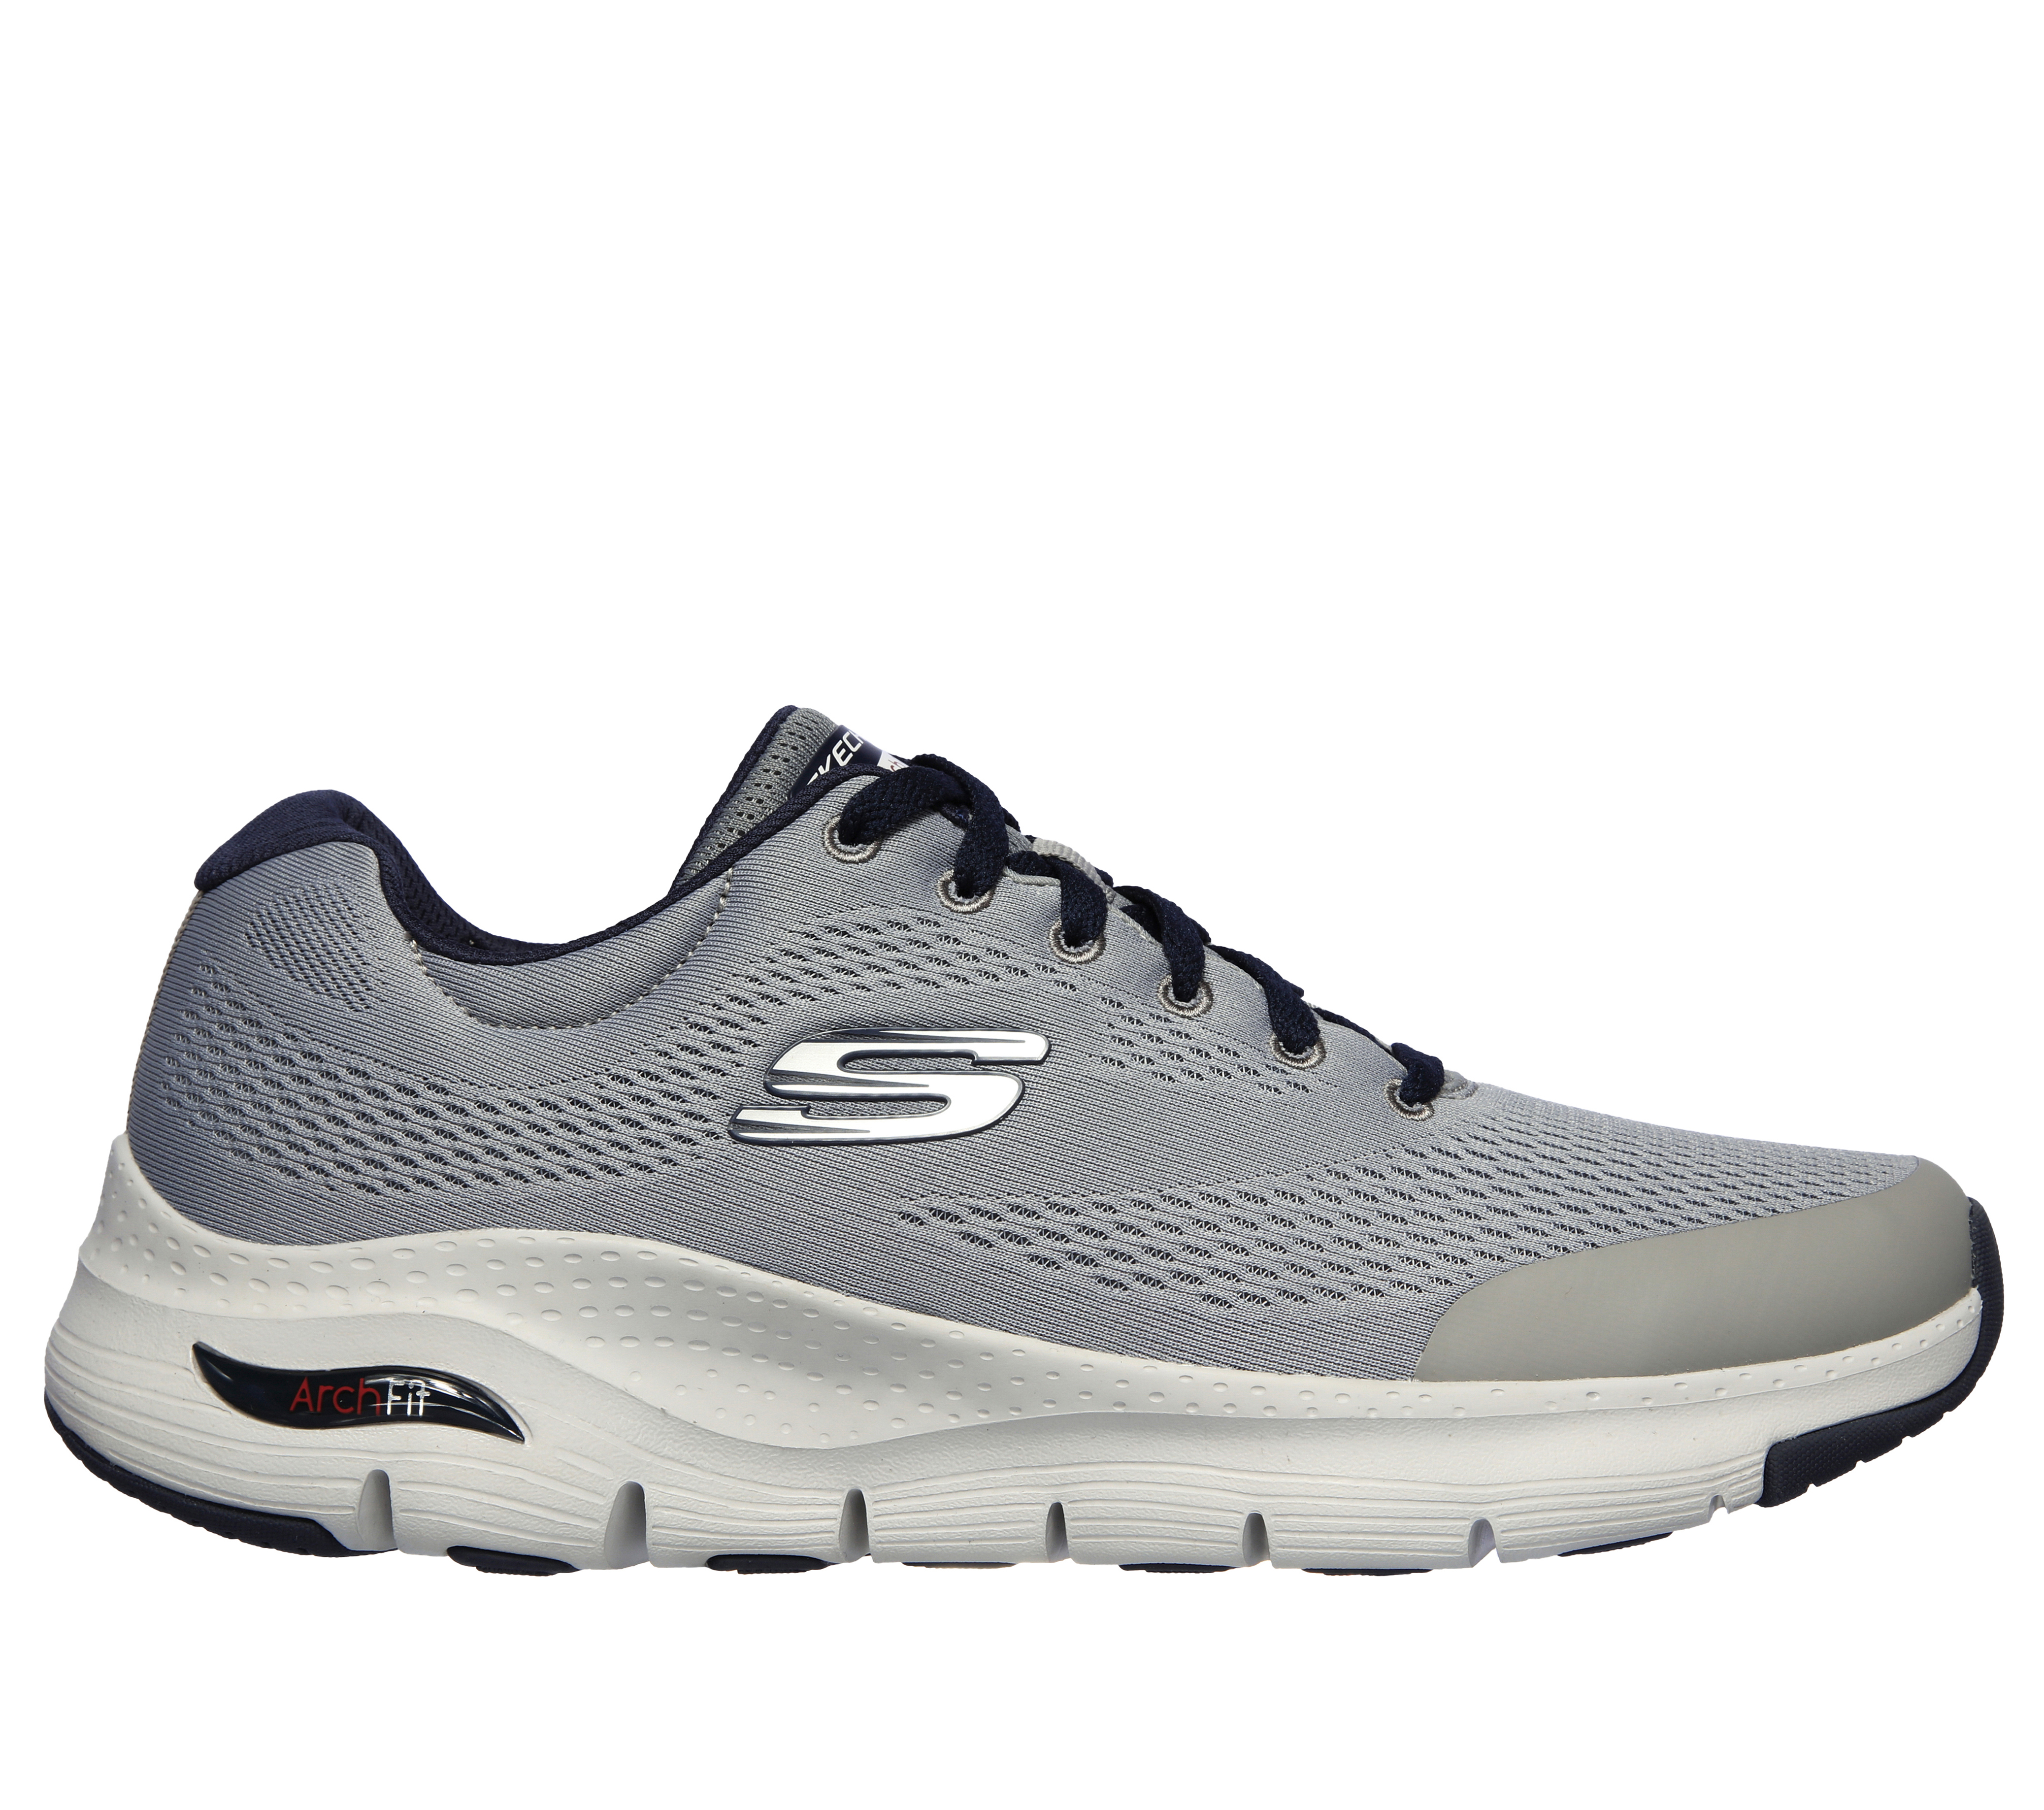 Skechers Arch Fit Escape Plan Hiking Shoes, Navy at John Lewis & Partners